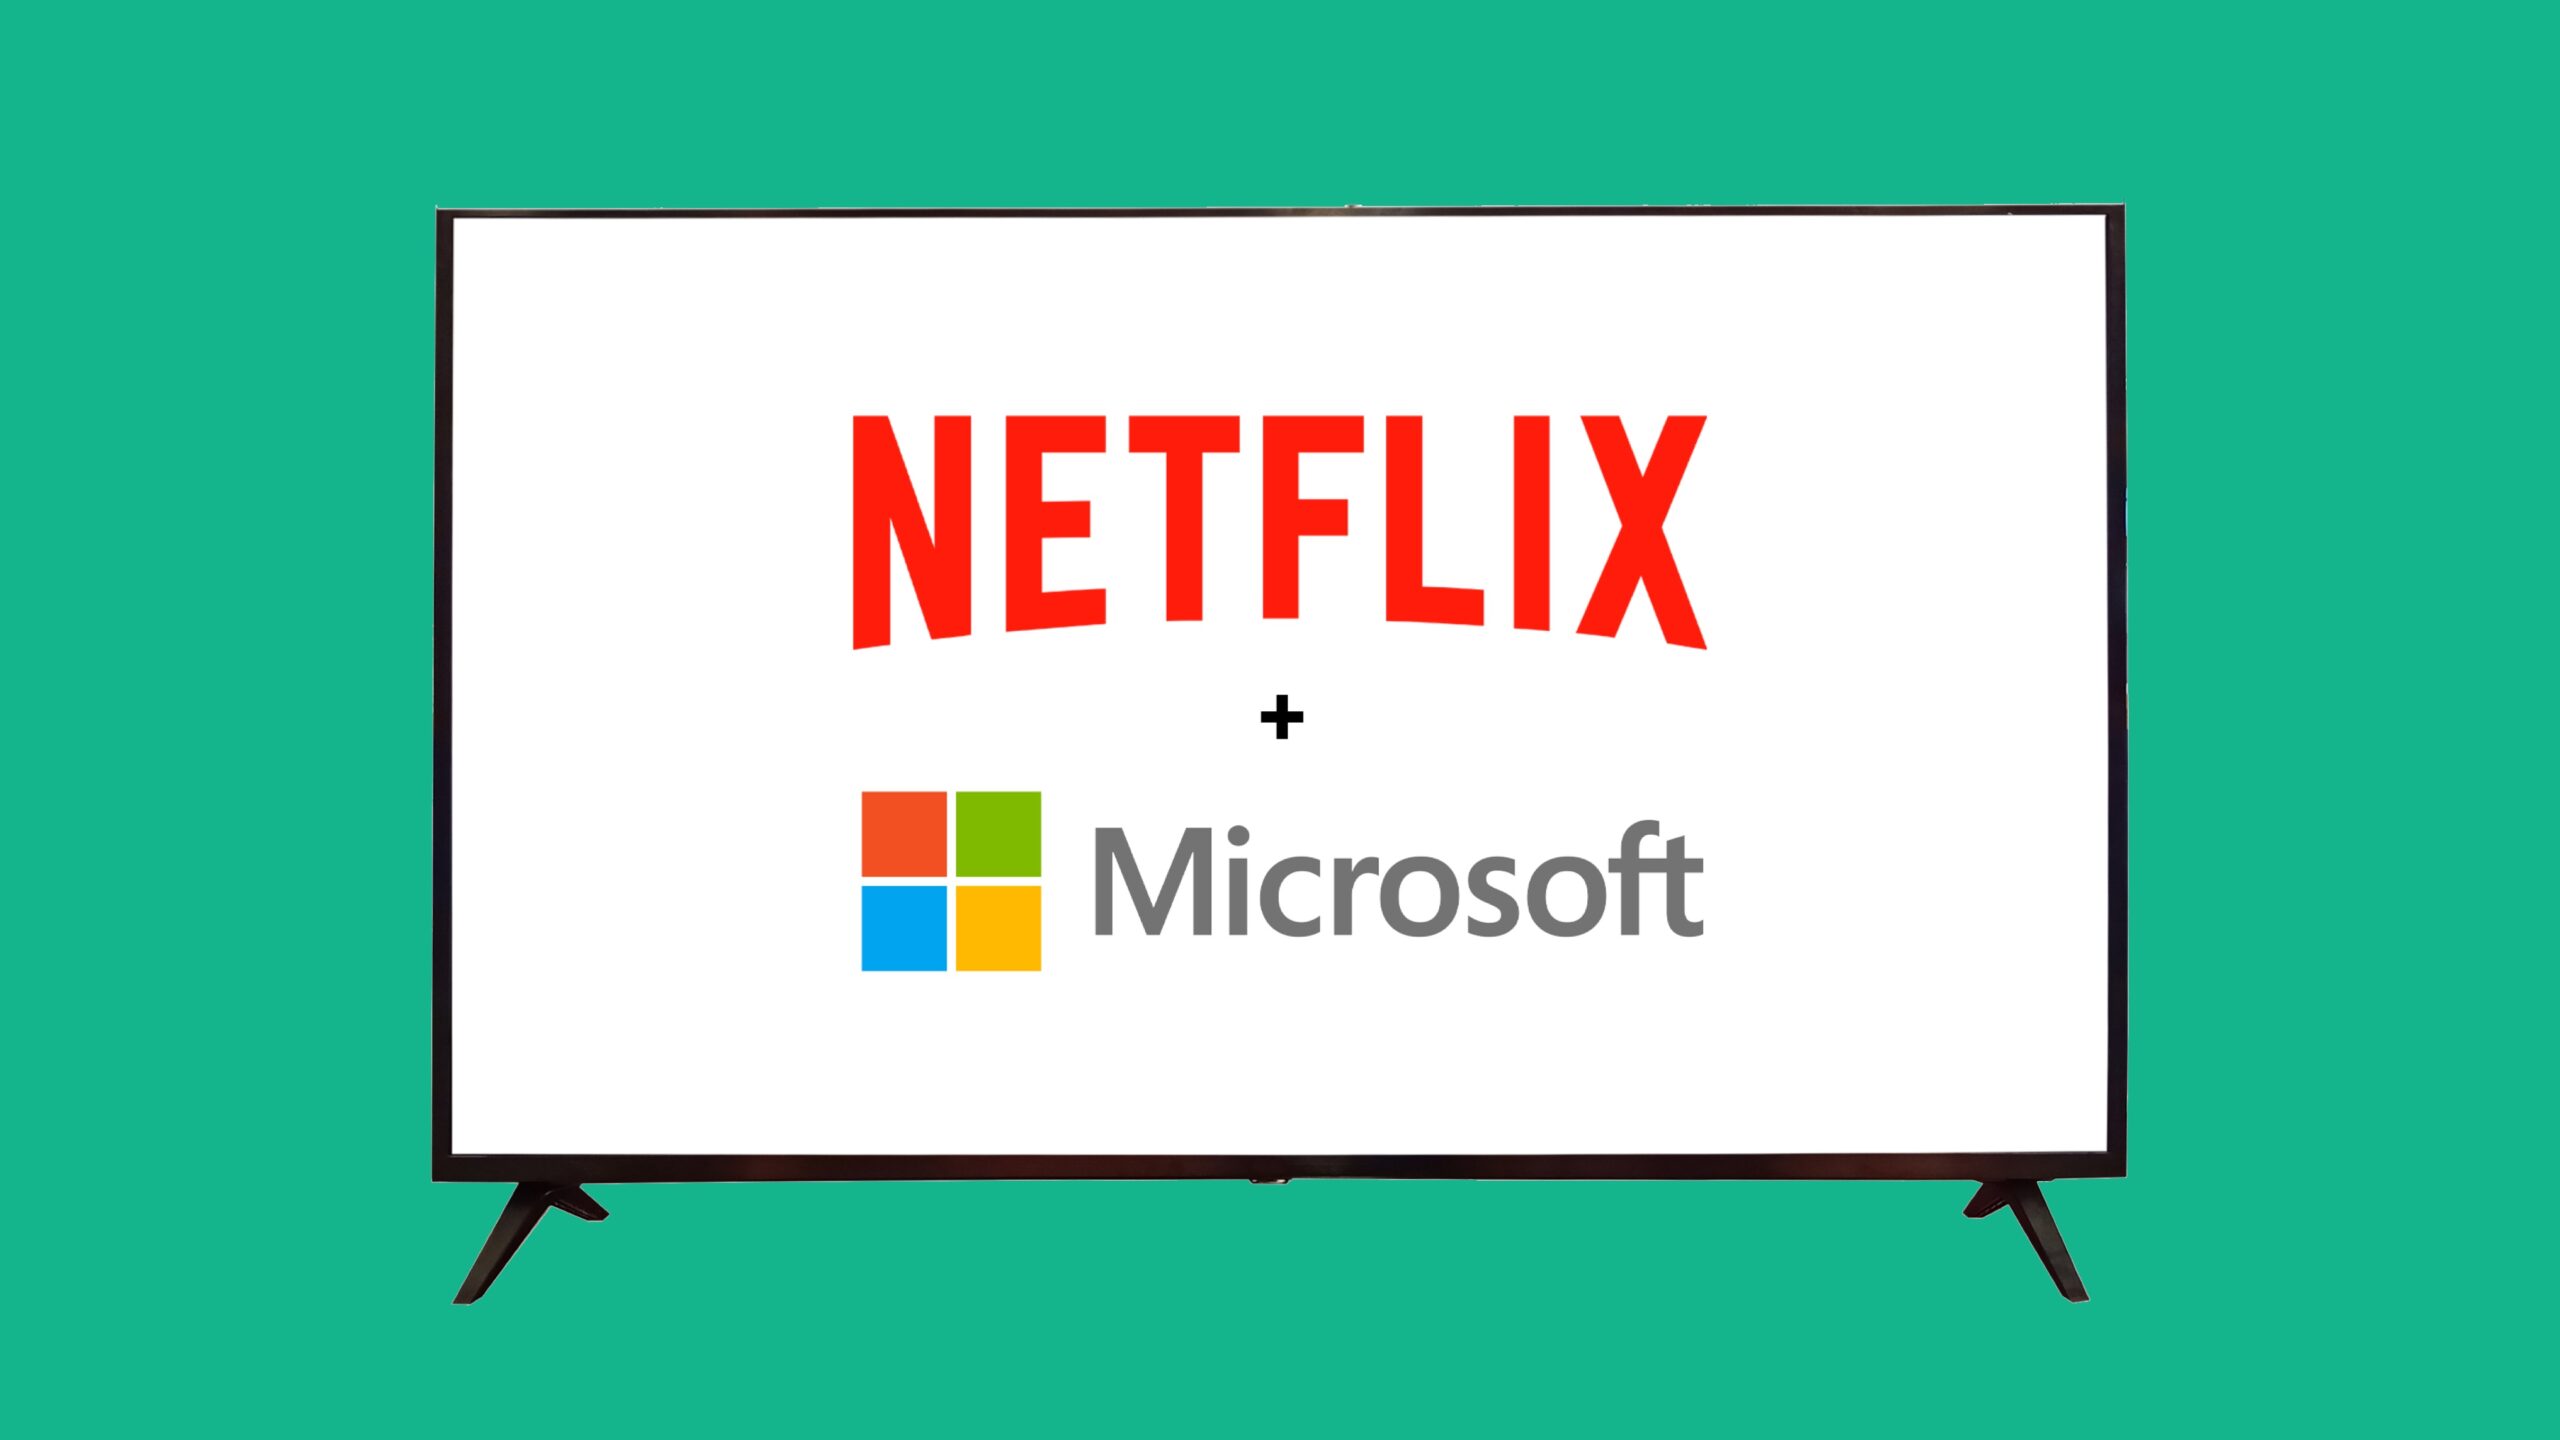 Netflix + Microsoft—The Good, the Bad and the What Ifs